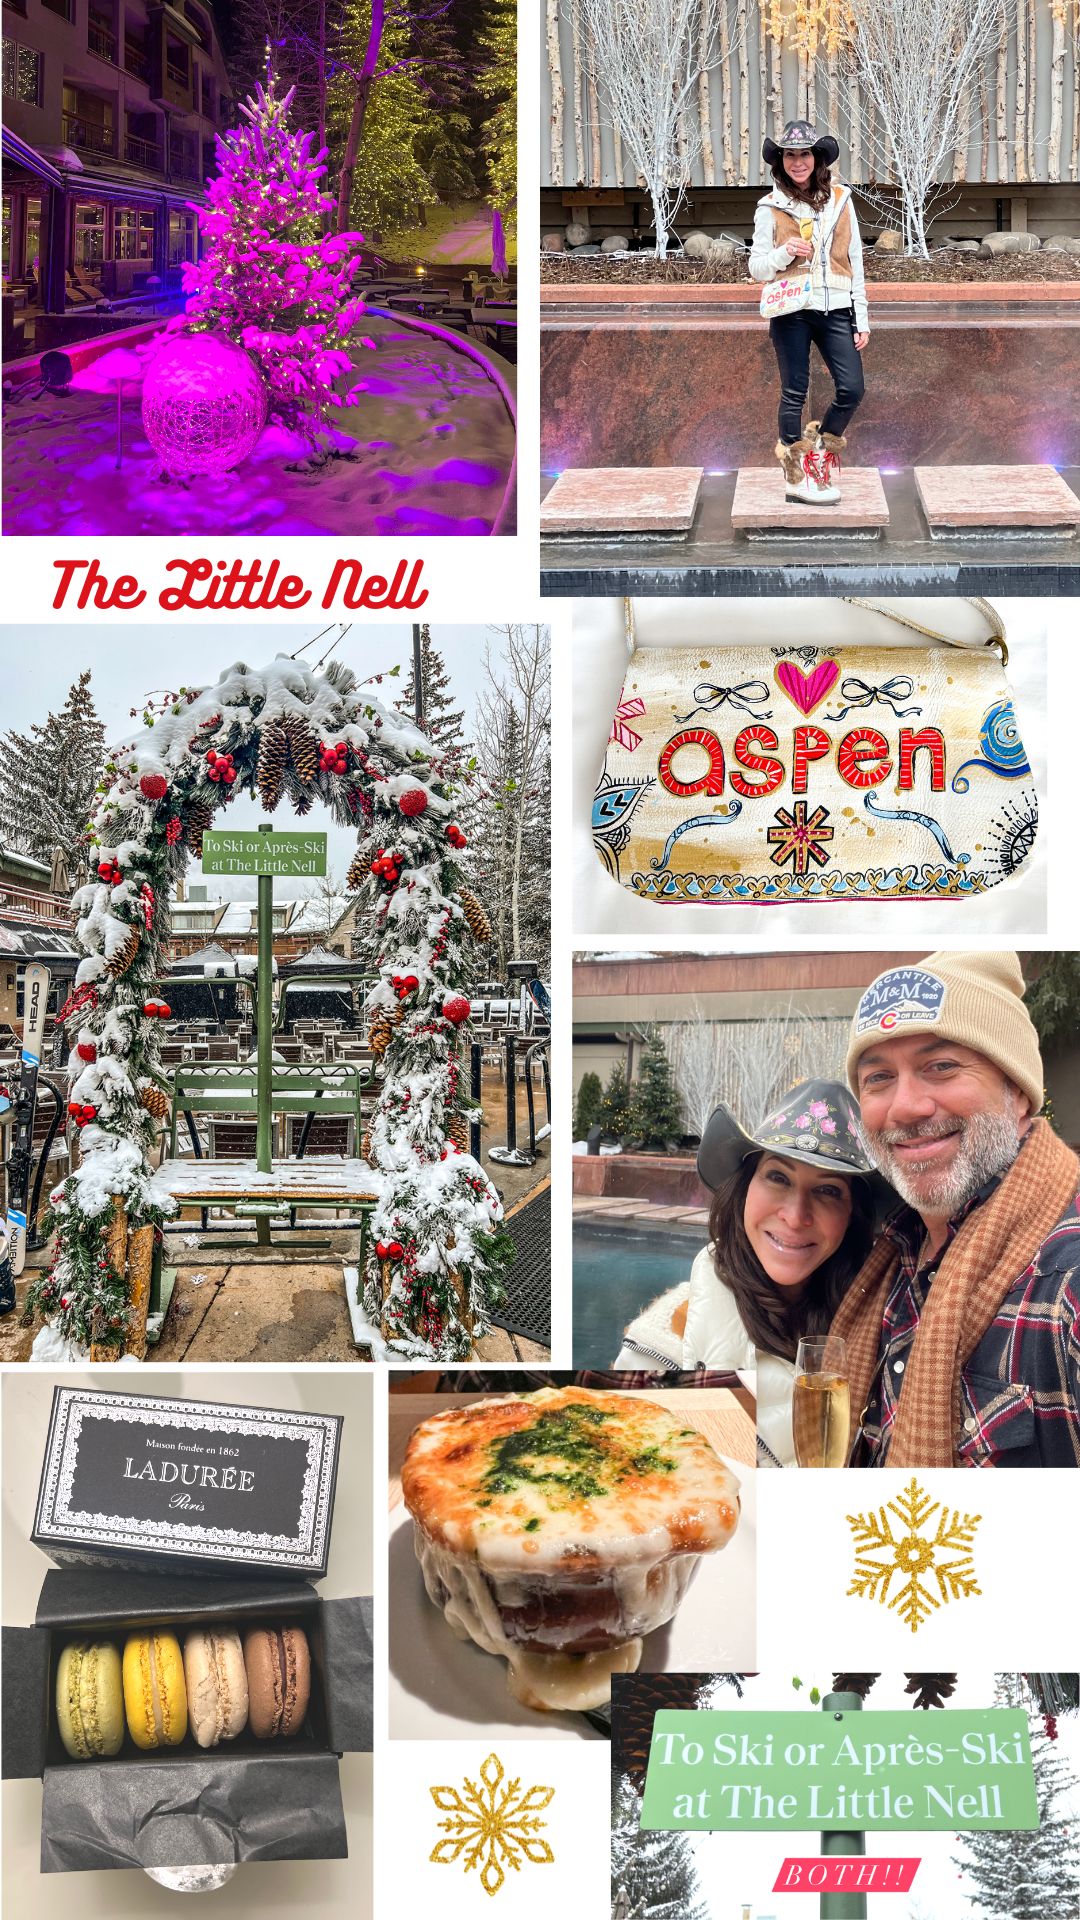 Marla Meridith's winter vacation at The Little Nell 5-star hotel in Aspen, Colorado 